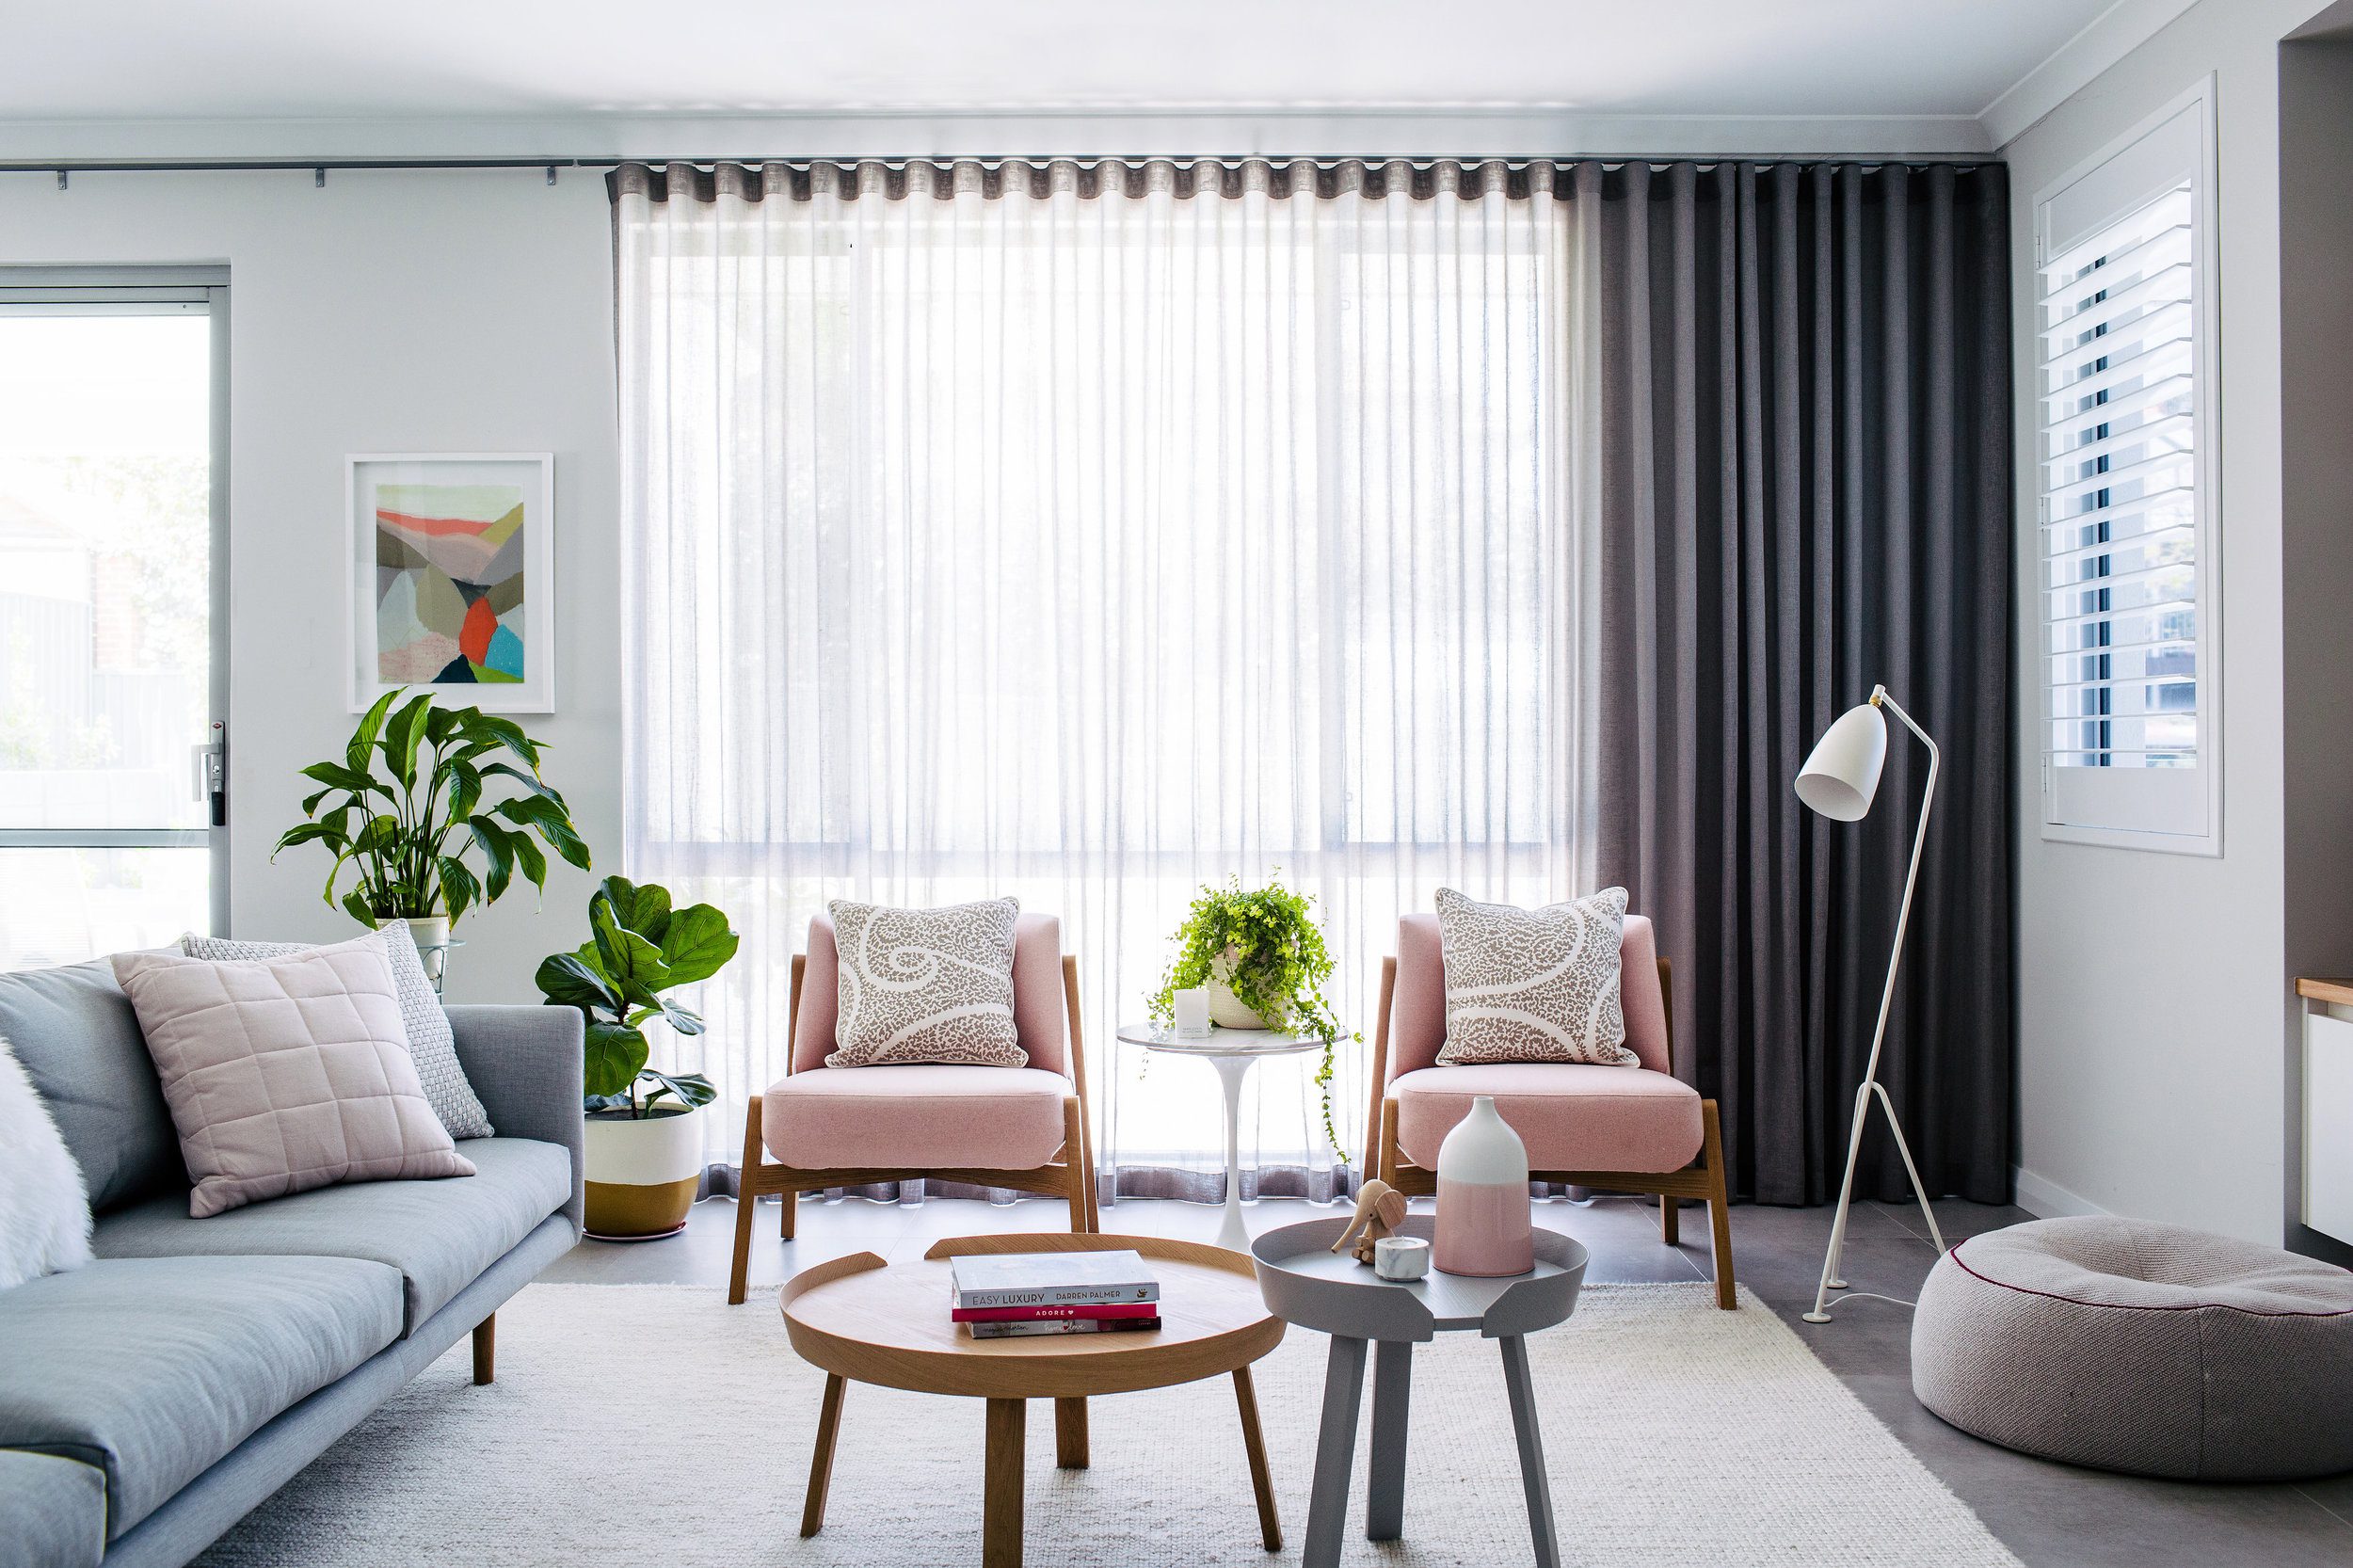 Which Curtain Fabrics Work Best for Different Home Decor Styles?